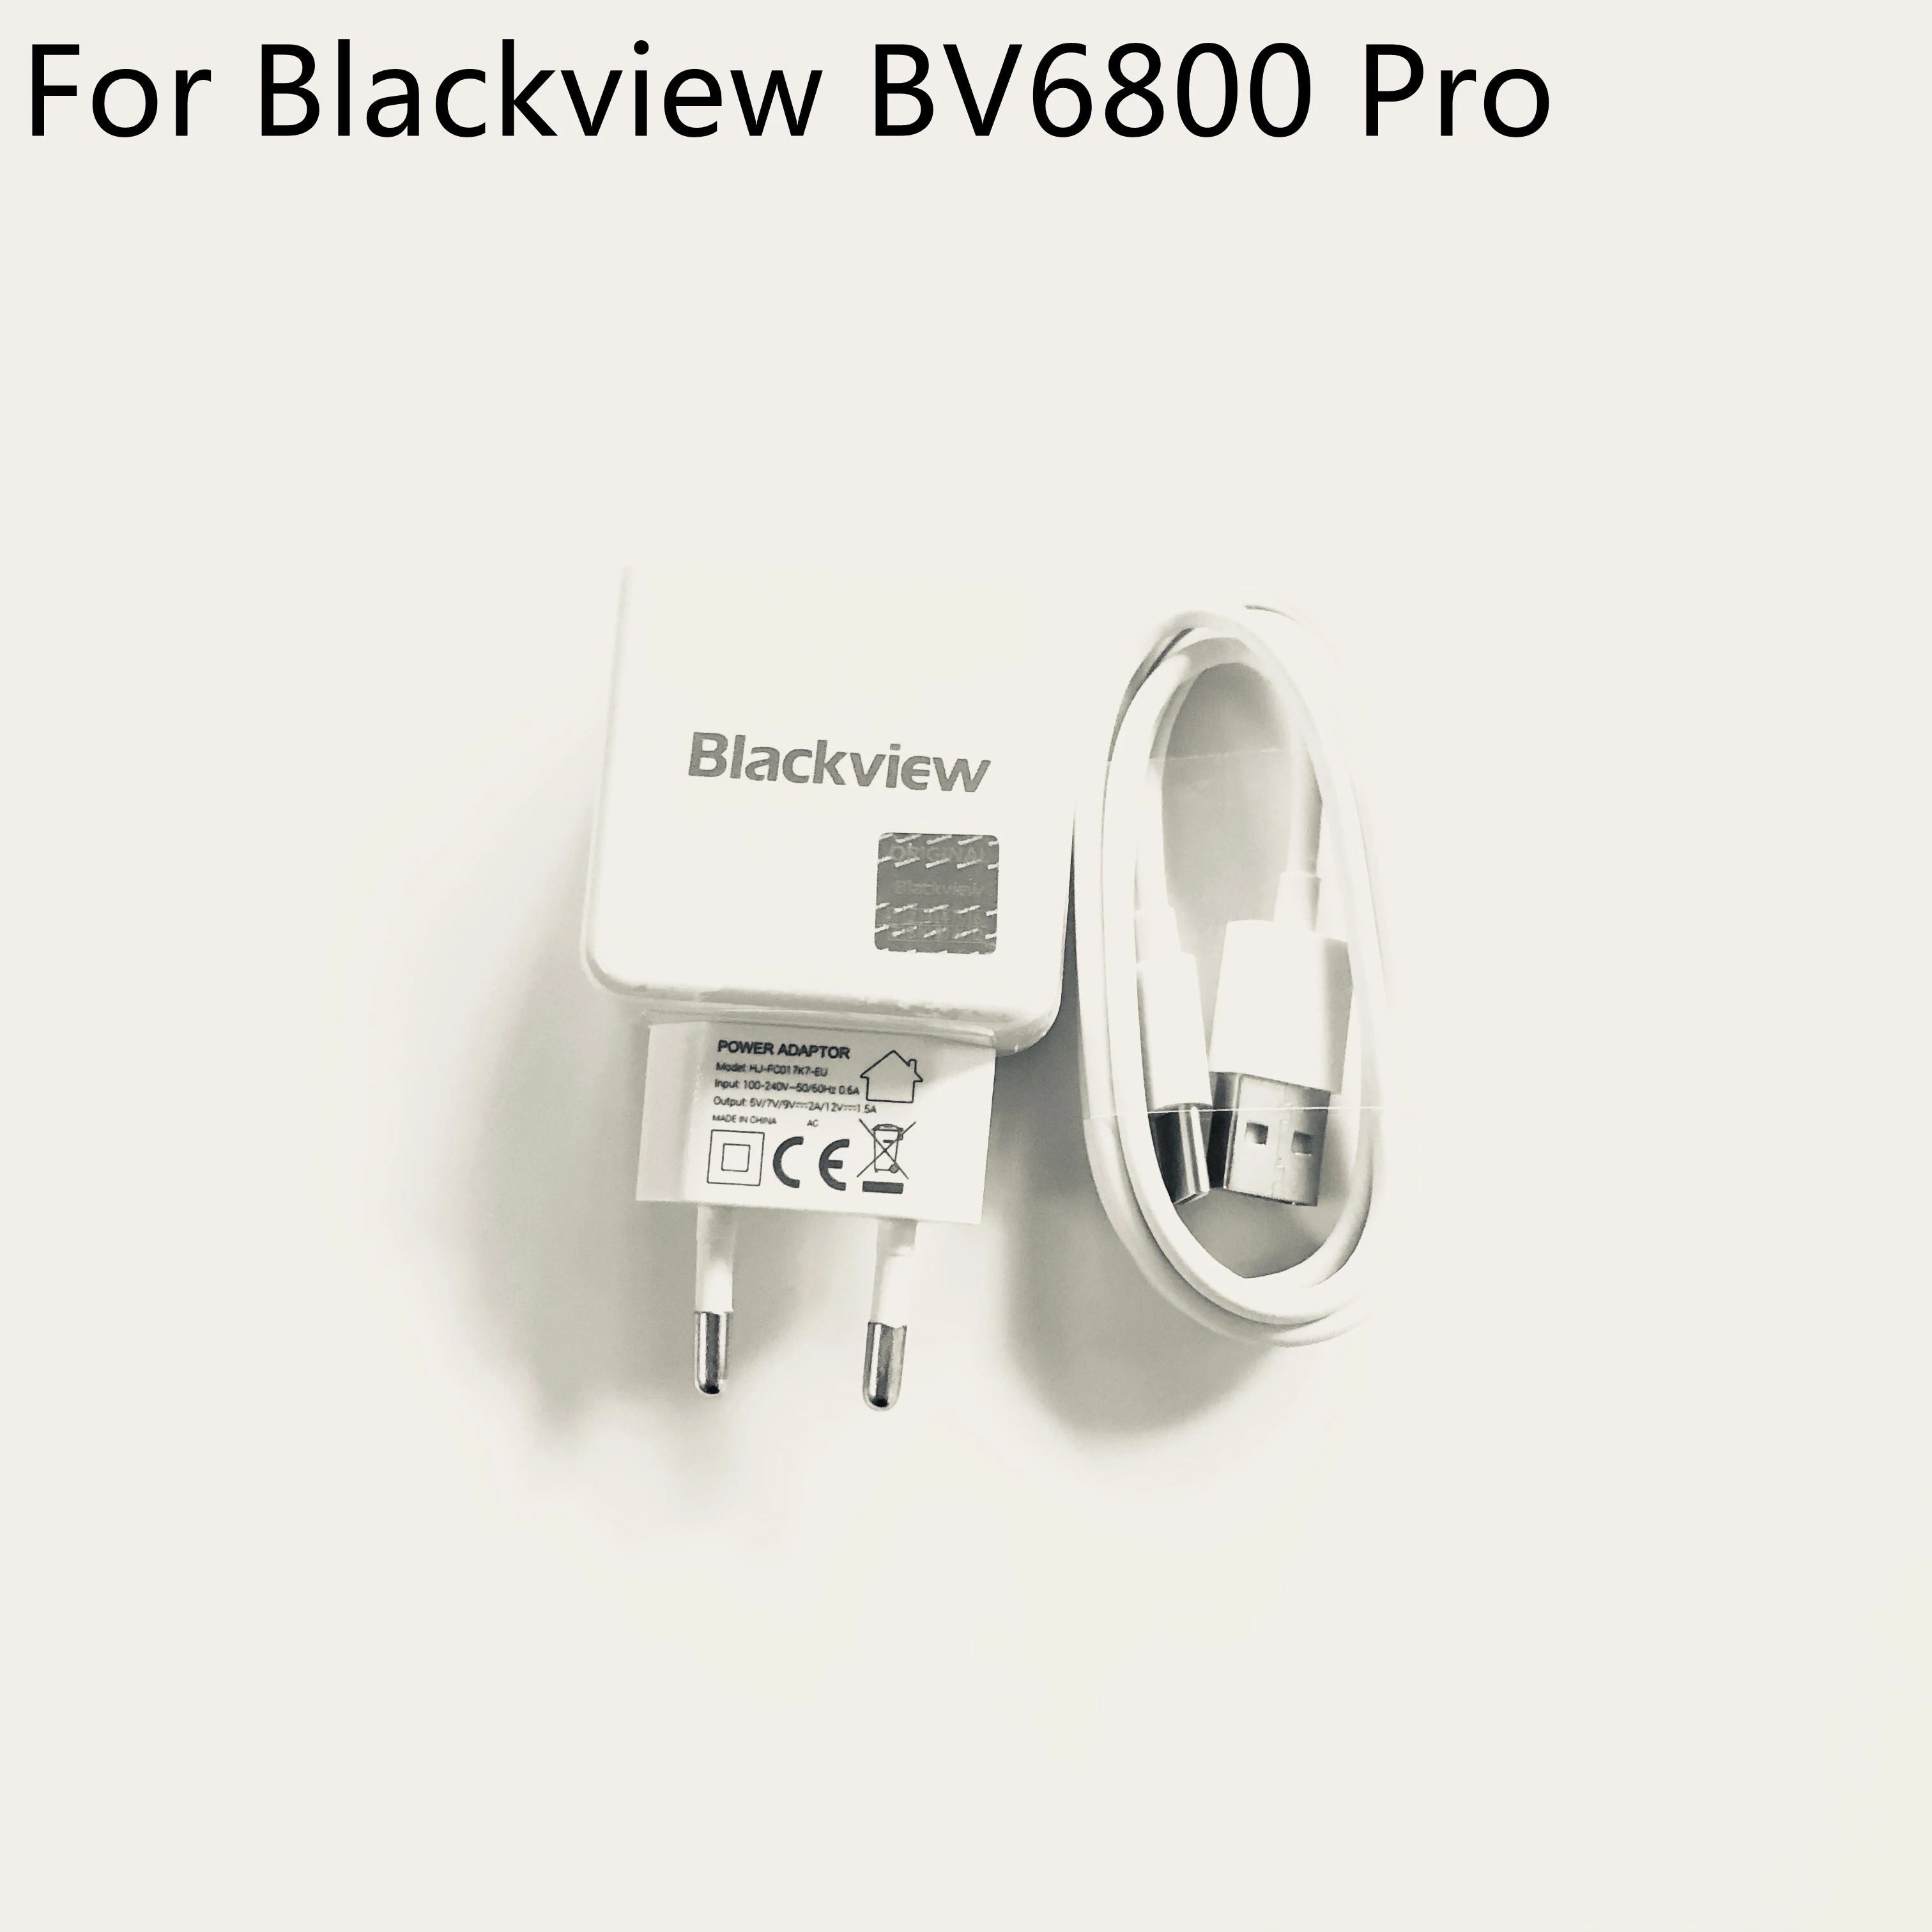 

New Travel Charger + Type-C Cable For BLACKVIEW BV6800 Pro MT6750T Octa Core 5.7"FHD 2160x1080 Mobile Phone + Tracking Number